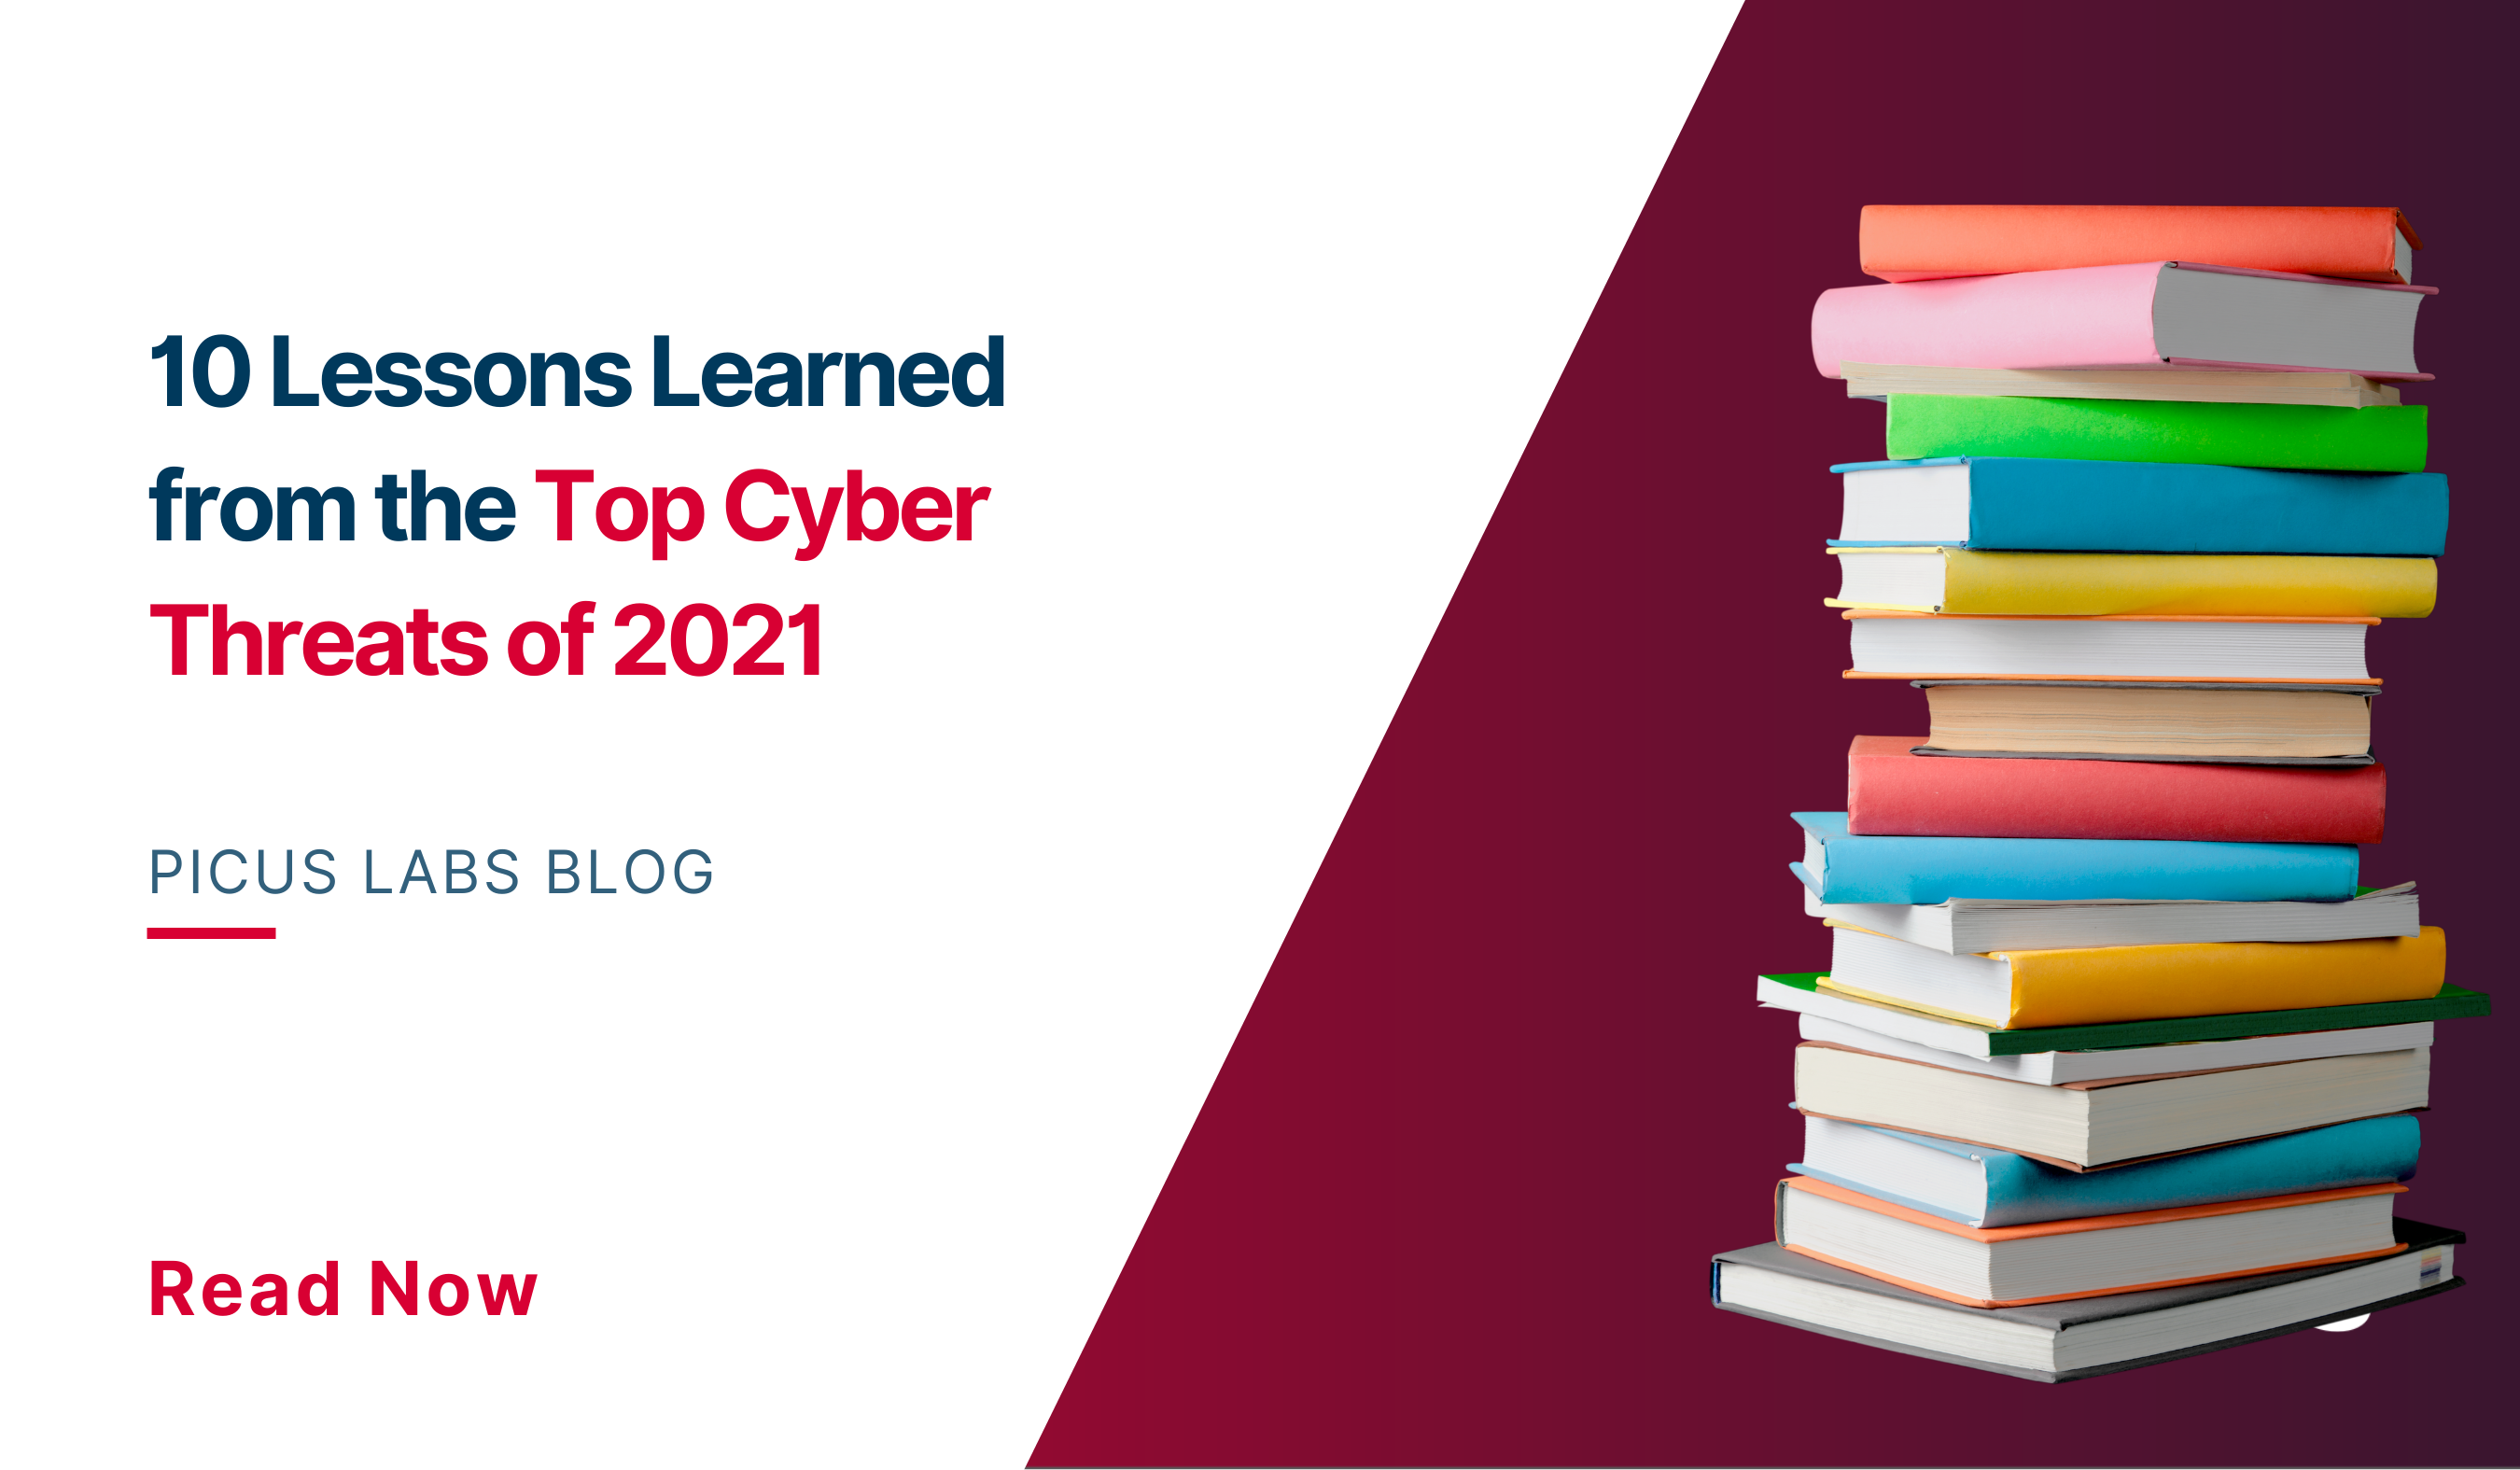 10 Lessons Learned from the Top Cyber Threats of 2021